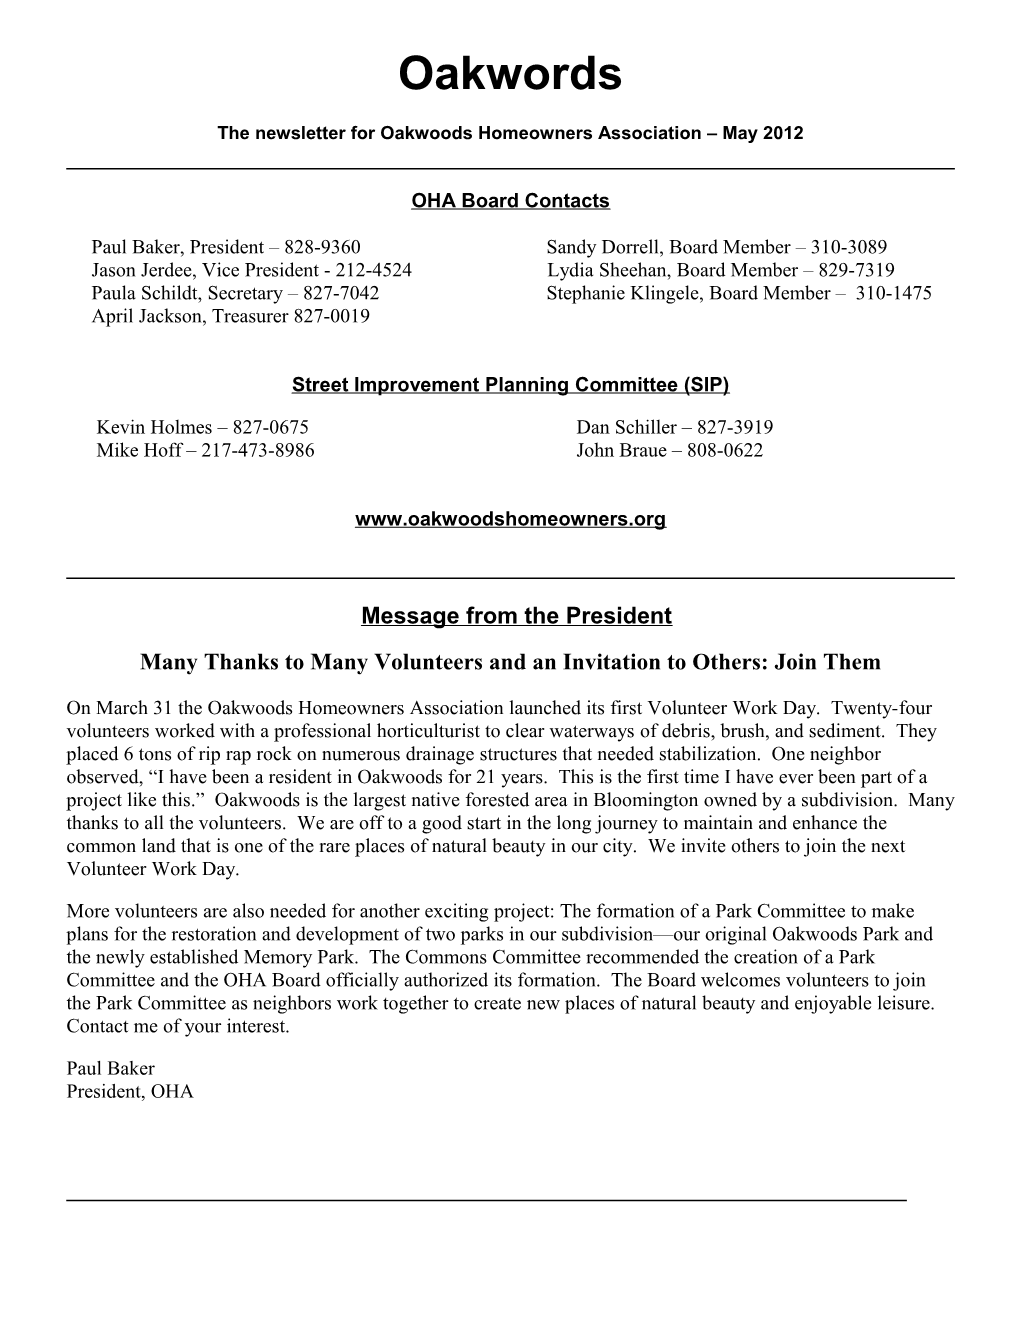 The Newsletter for Oakwoods Homeowners Association May 2012